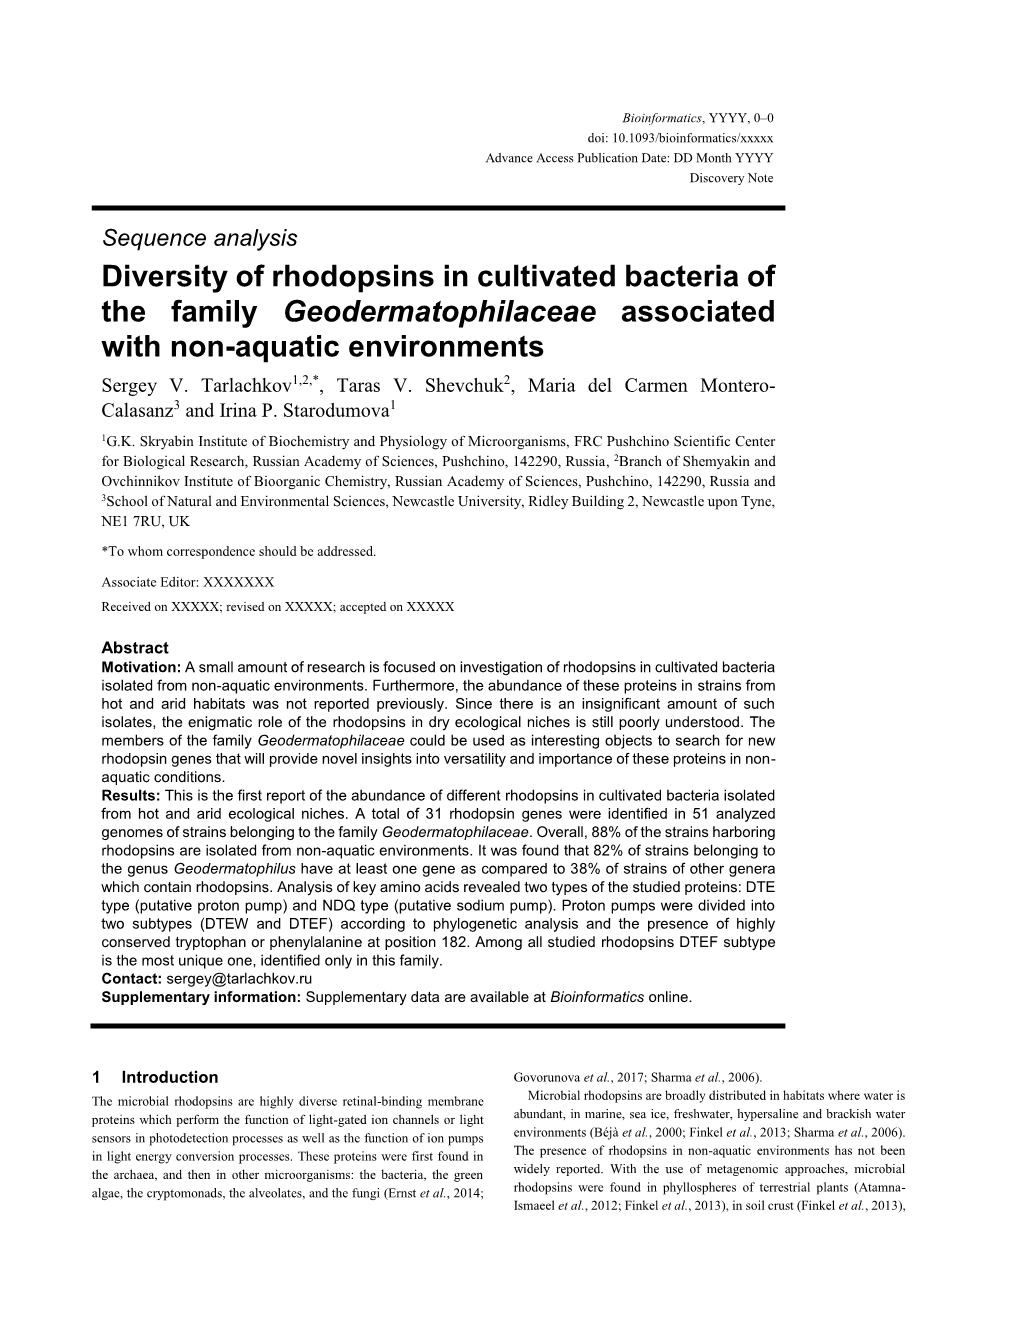 Diversity of Rhodopsins in Cultivated Bacteria of the Family Geodermatophilaceae Associated with Non-Aquatic Environments Sergey V